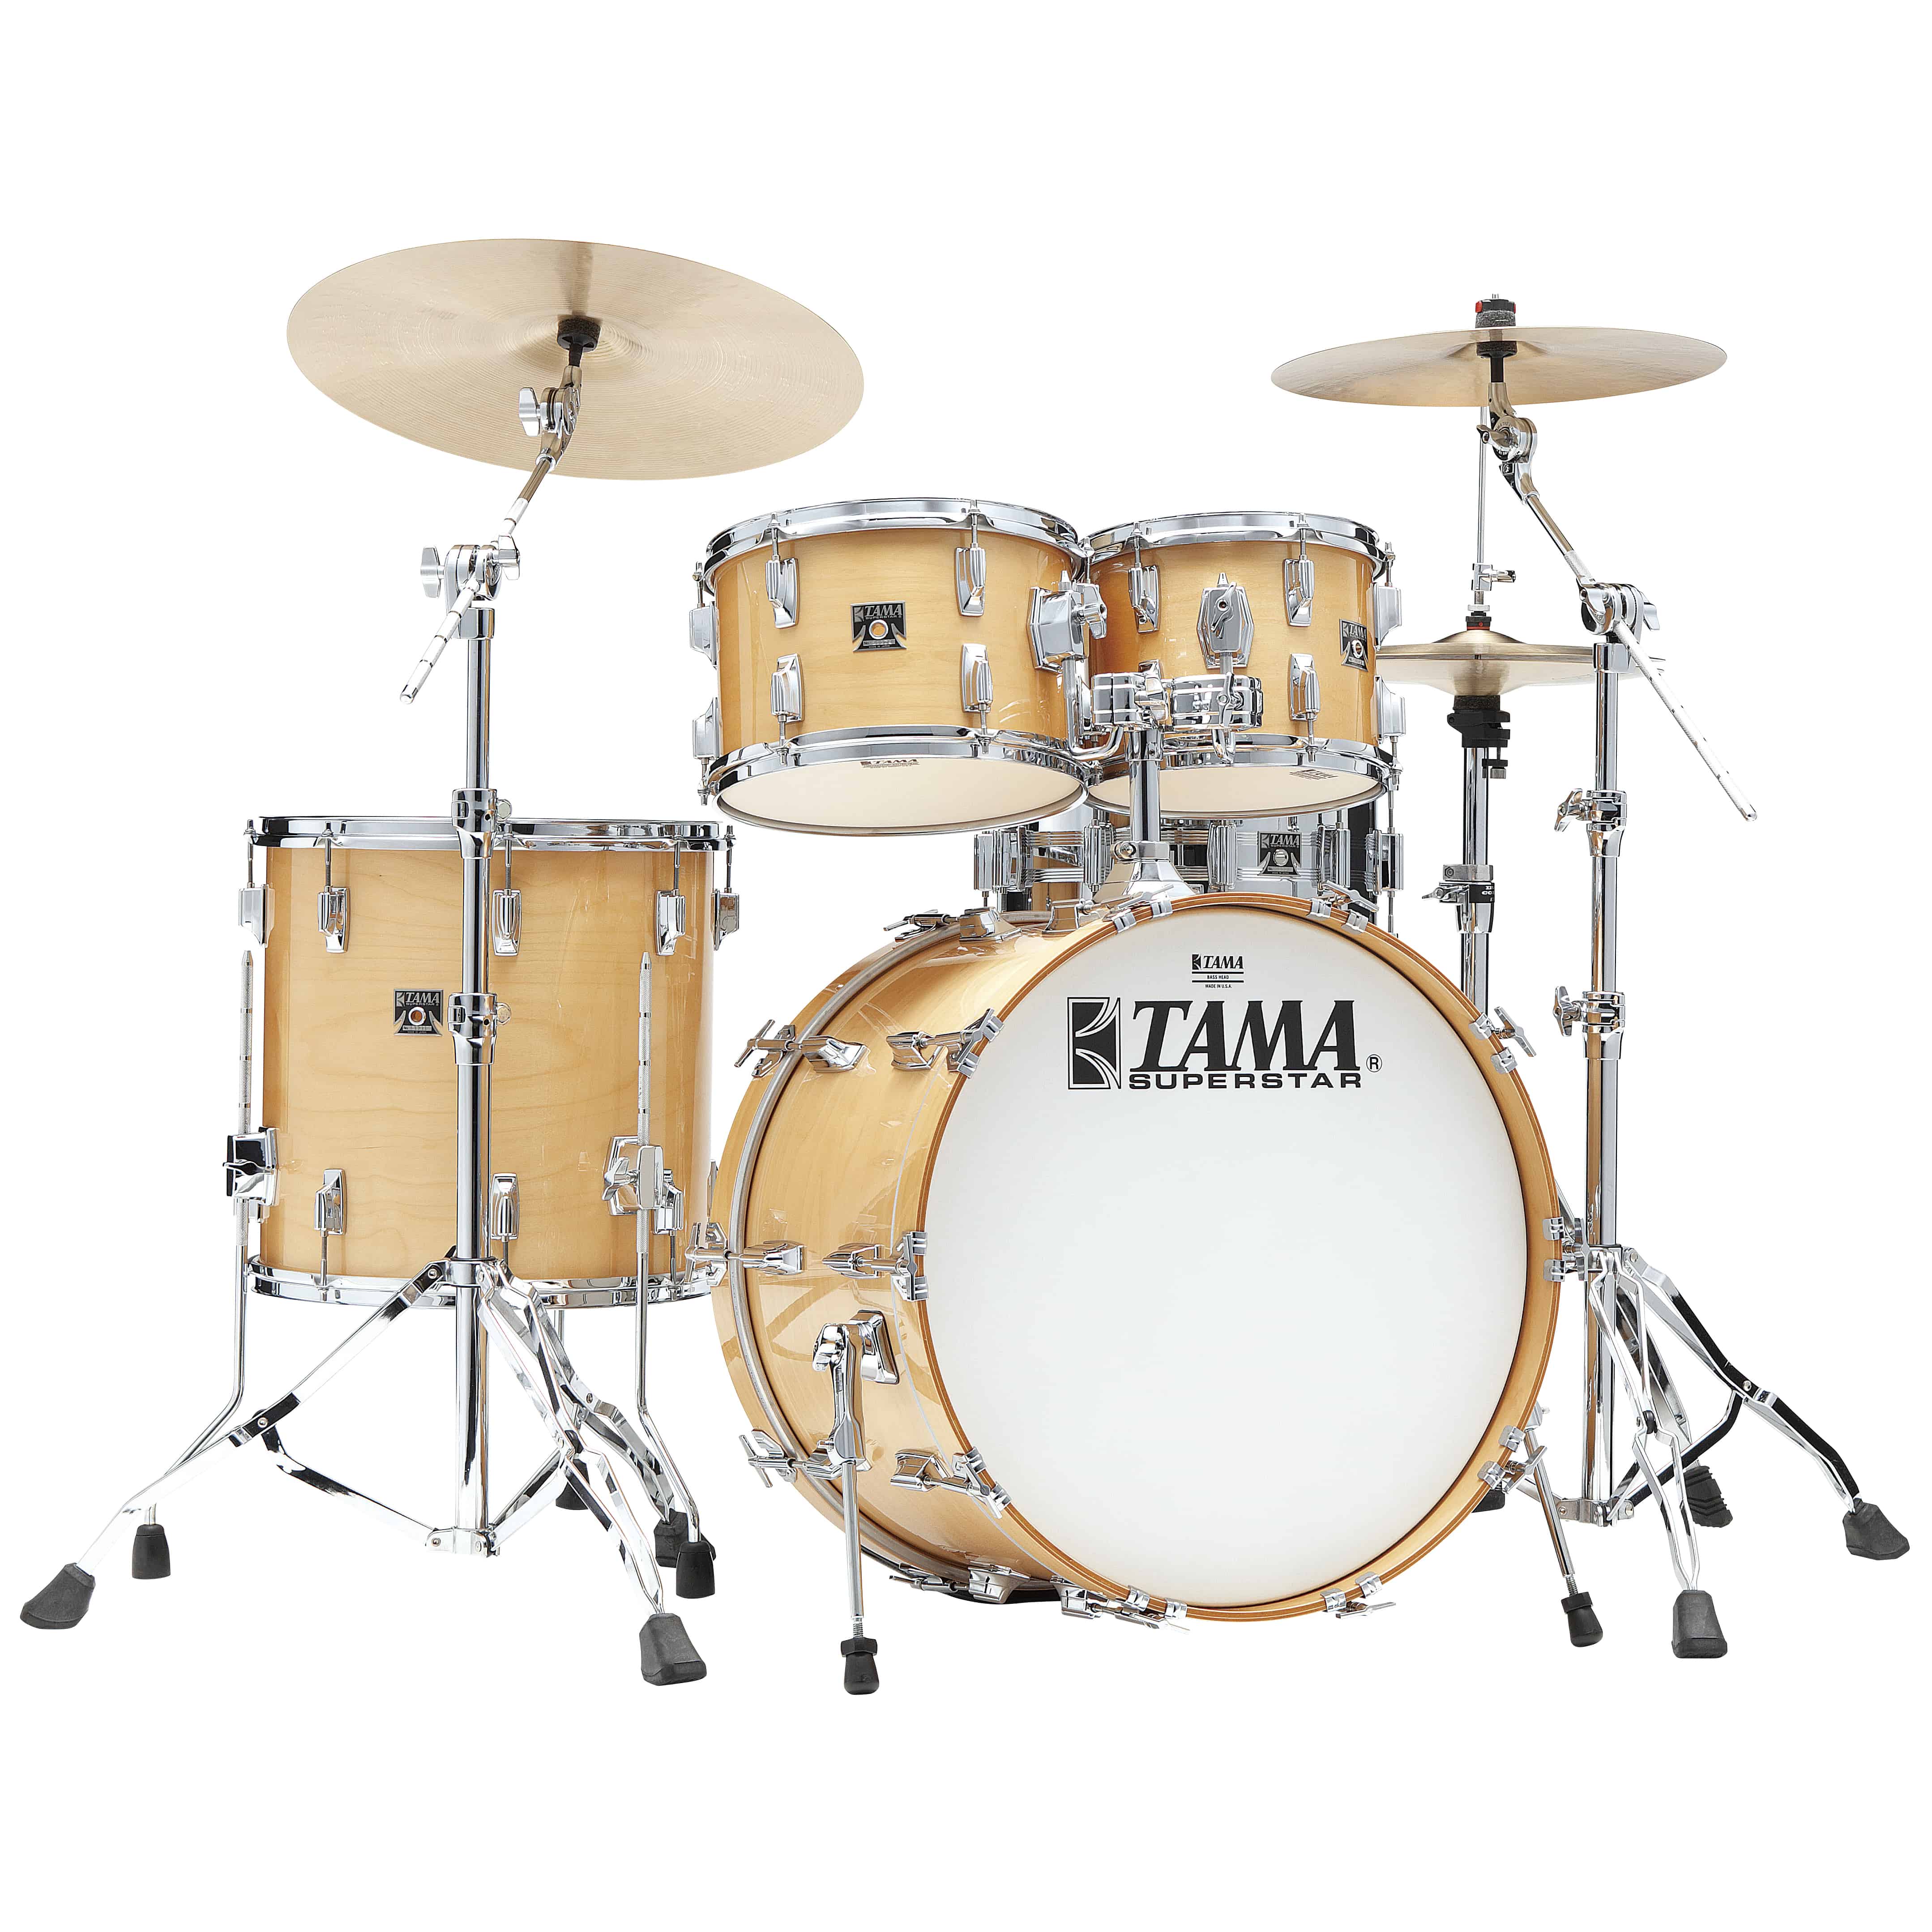 Tama SU42RS-SPM - 50th LIMITED Superstar Reissue 4pcs Drum Shell Kit - Super Maple